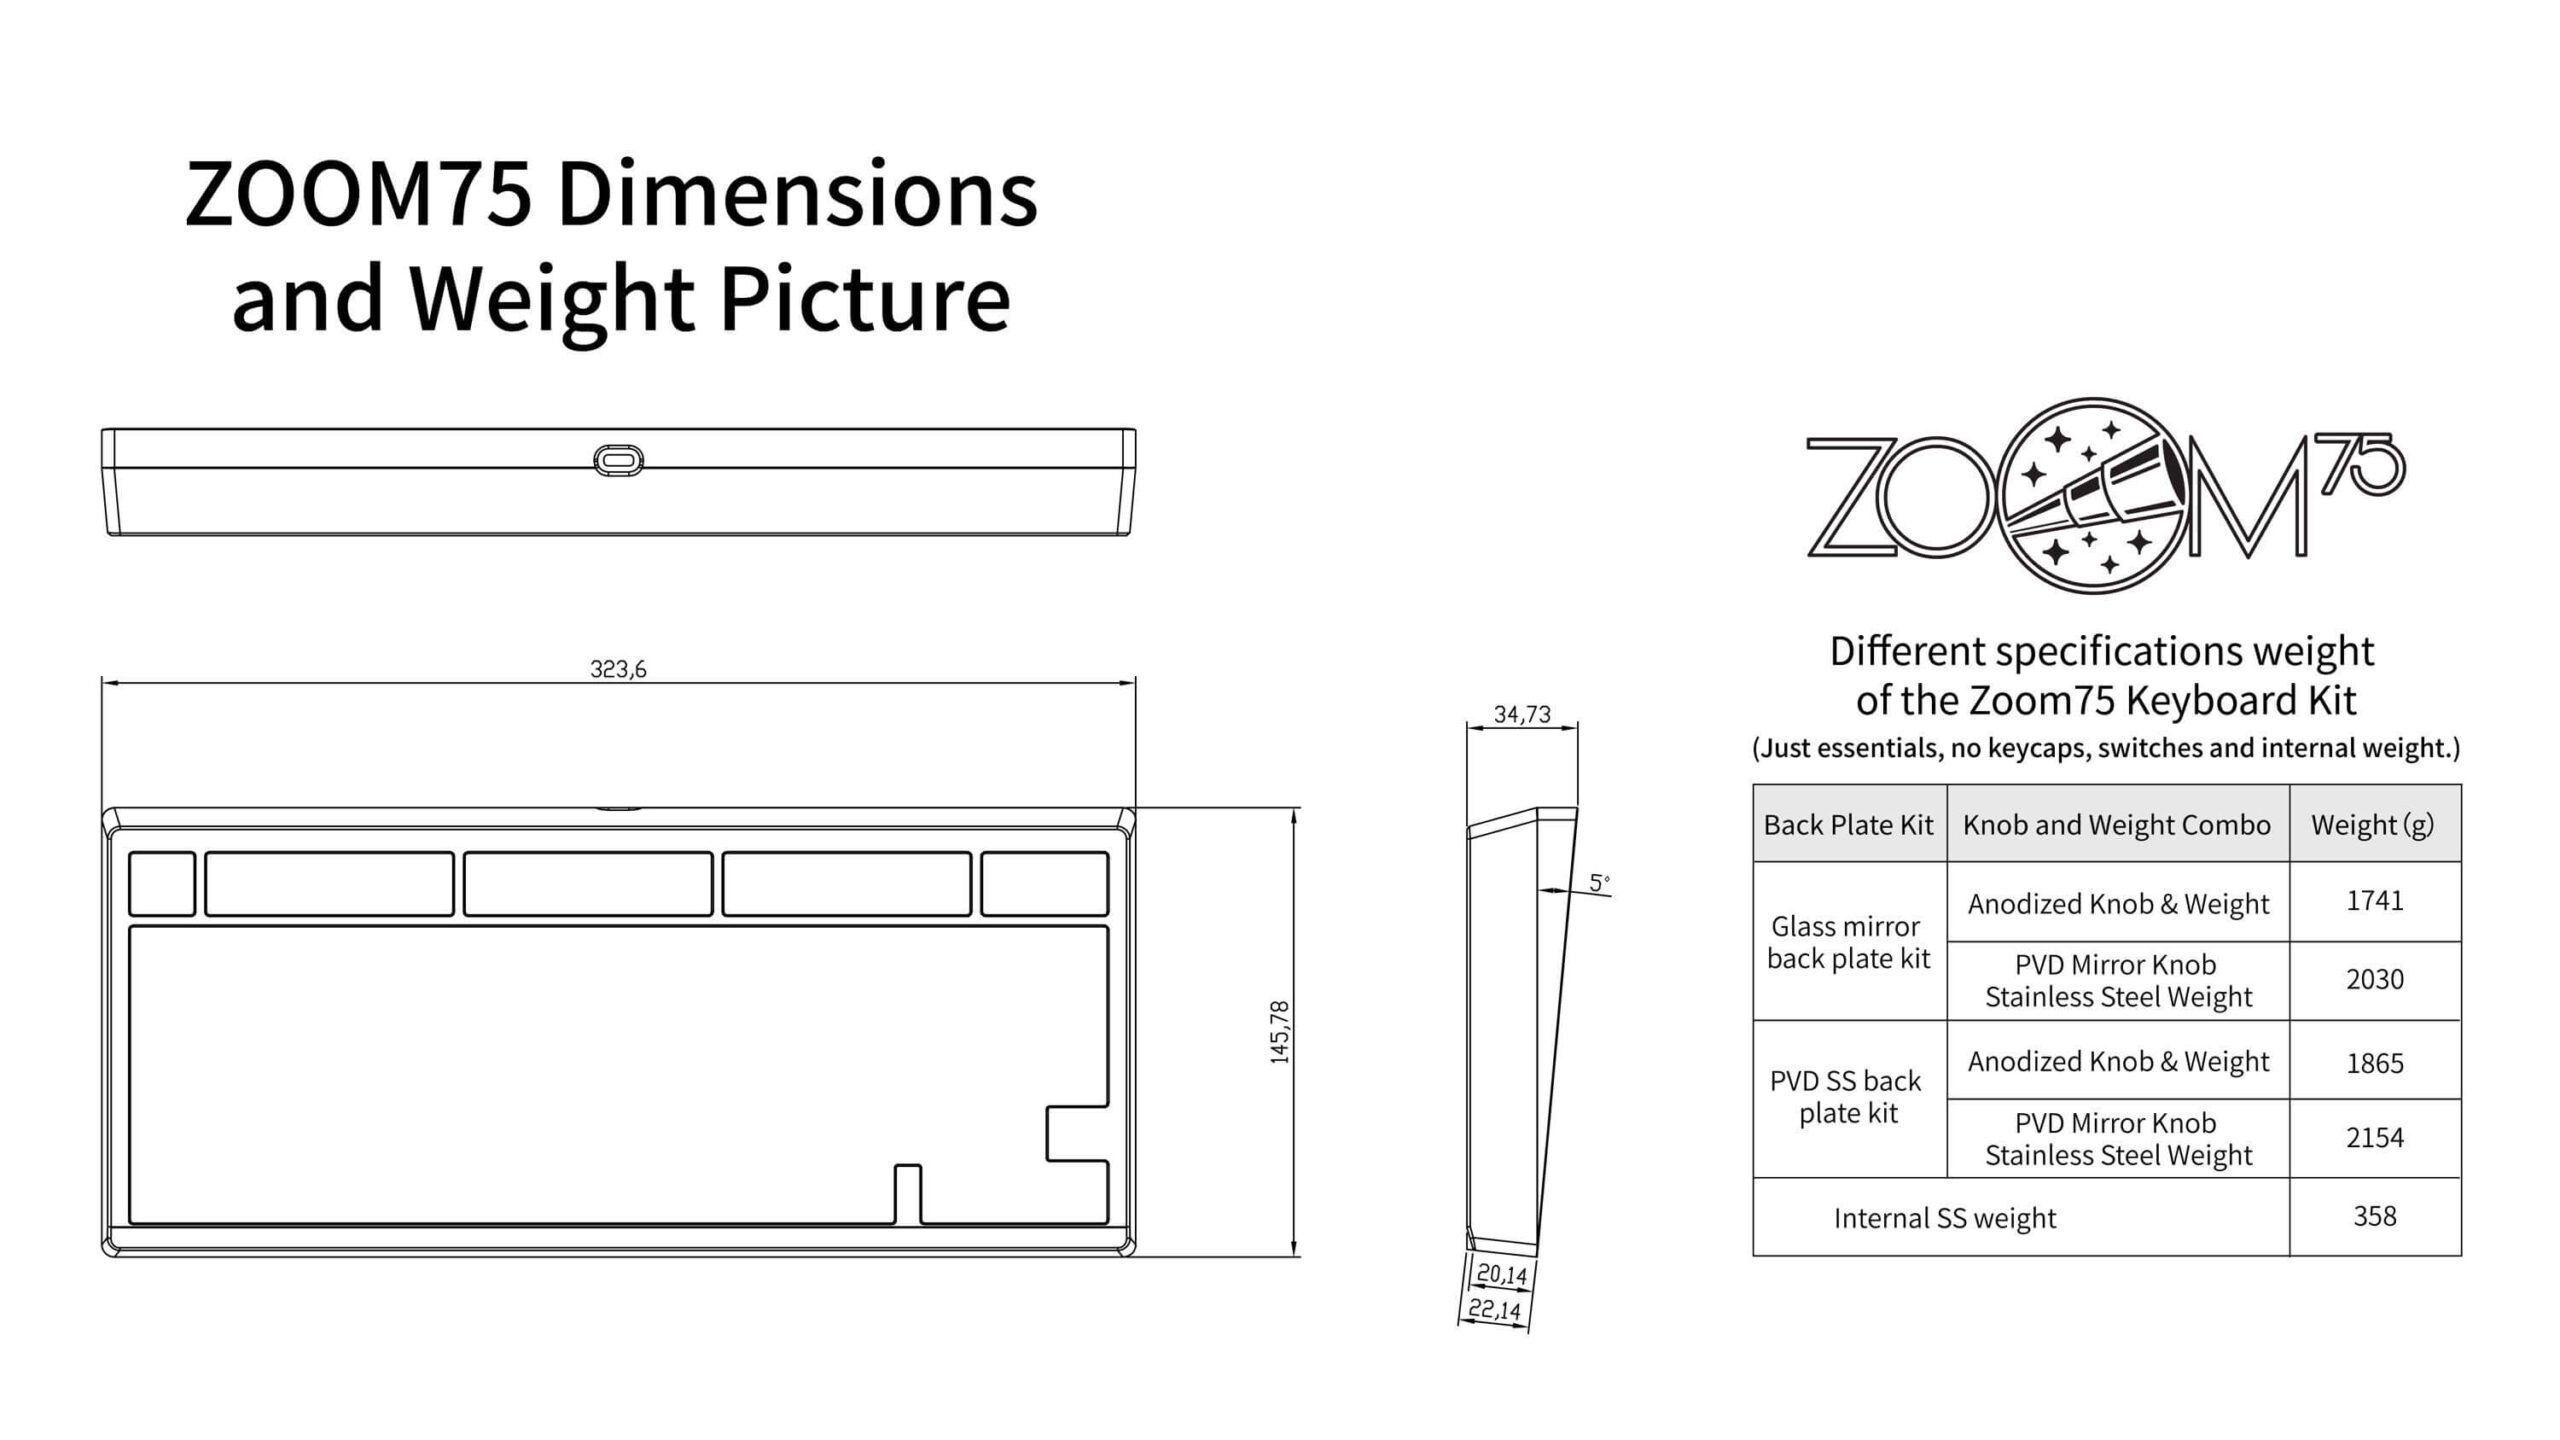 ZOOM75 Dimensions and Weight Picture 01 1 scaled